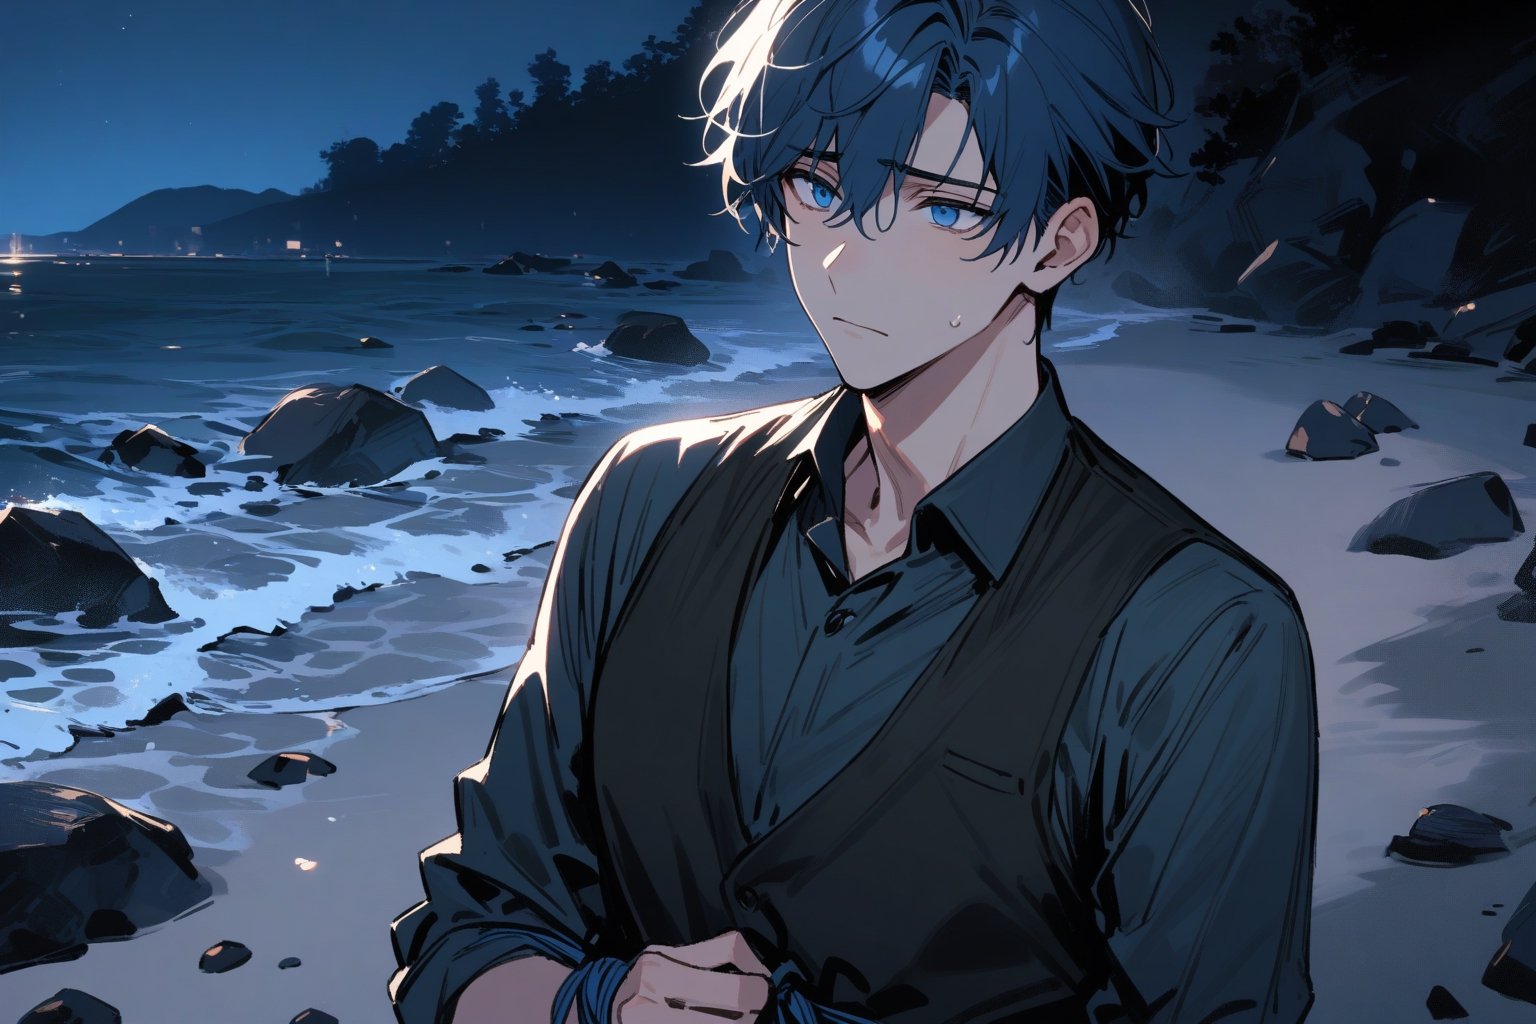 1 handsome boy,male_solo, upper body,
blue short hair, blue eyes, 30 year old,
worried,
black vest,
hands are tied,
,is on a rocky beach on the beach, night,
warm skill, romatic atmostphe
masterpiece, best quality,